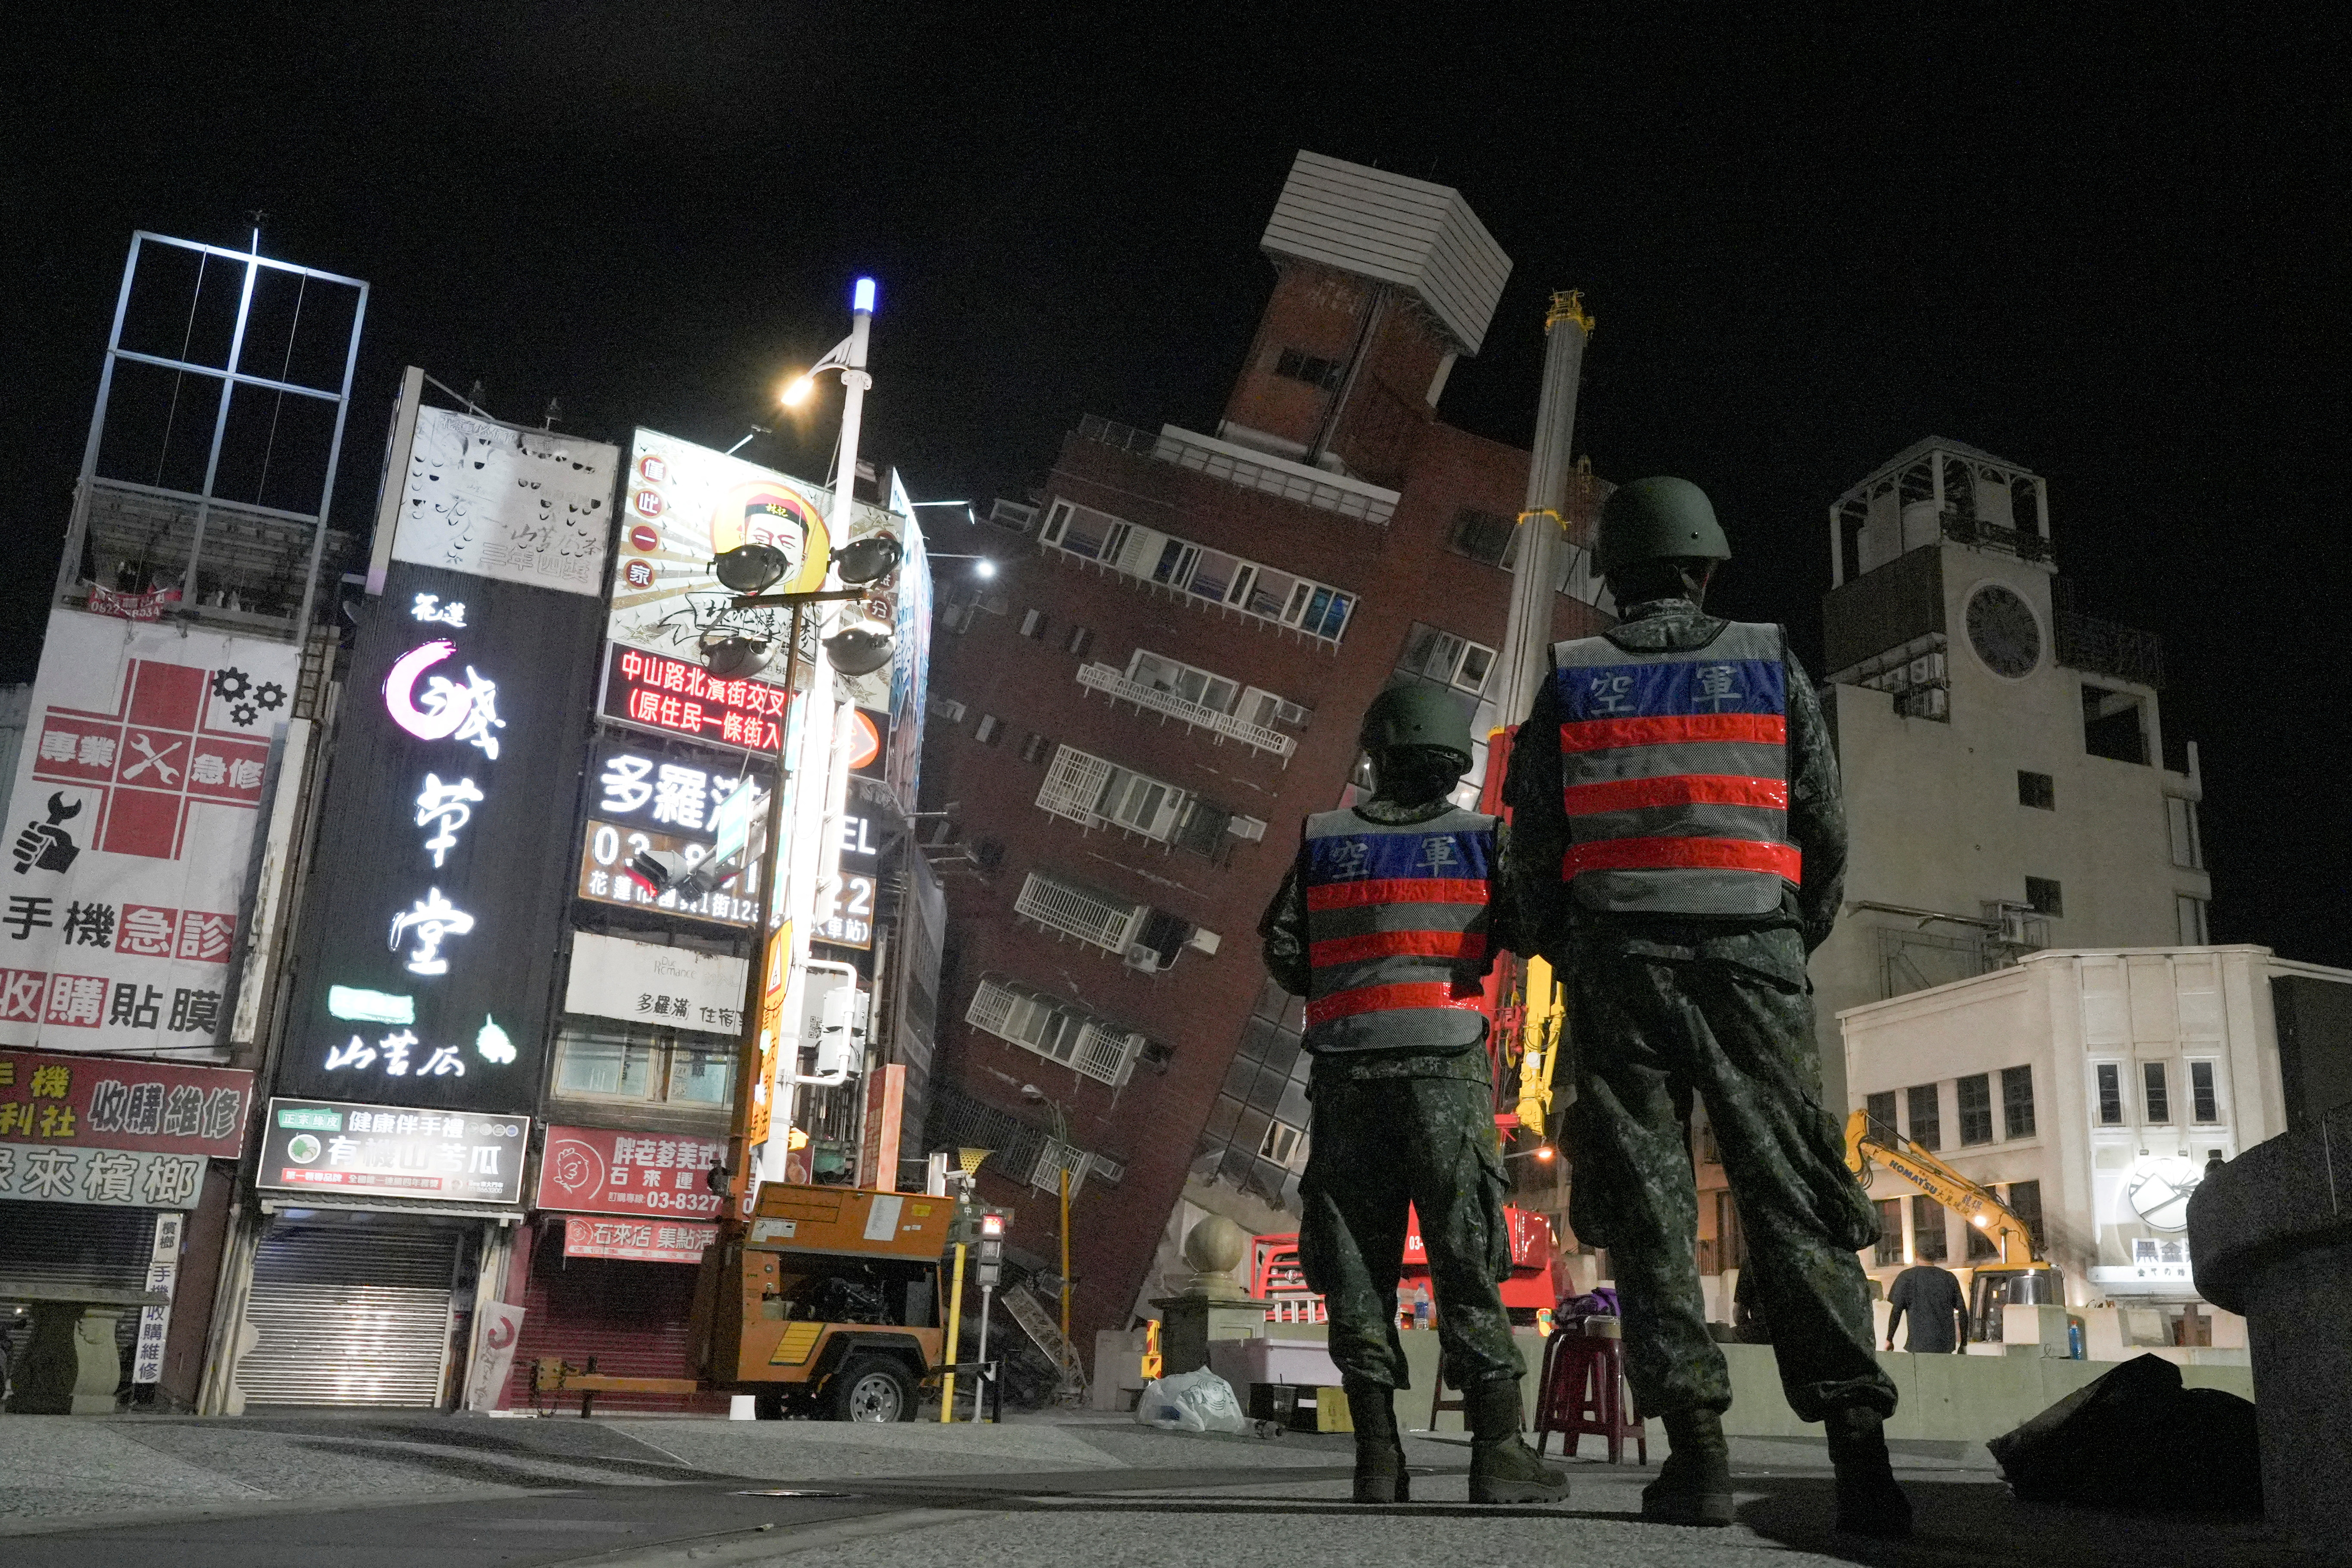 Soldiers stand near the site where a building collapsed, following an earthquake, in Hualien